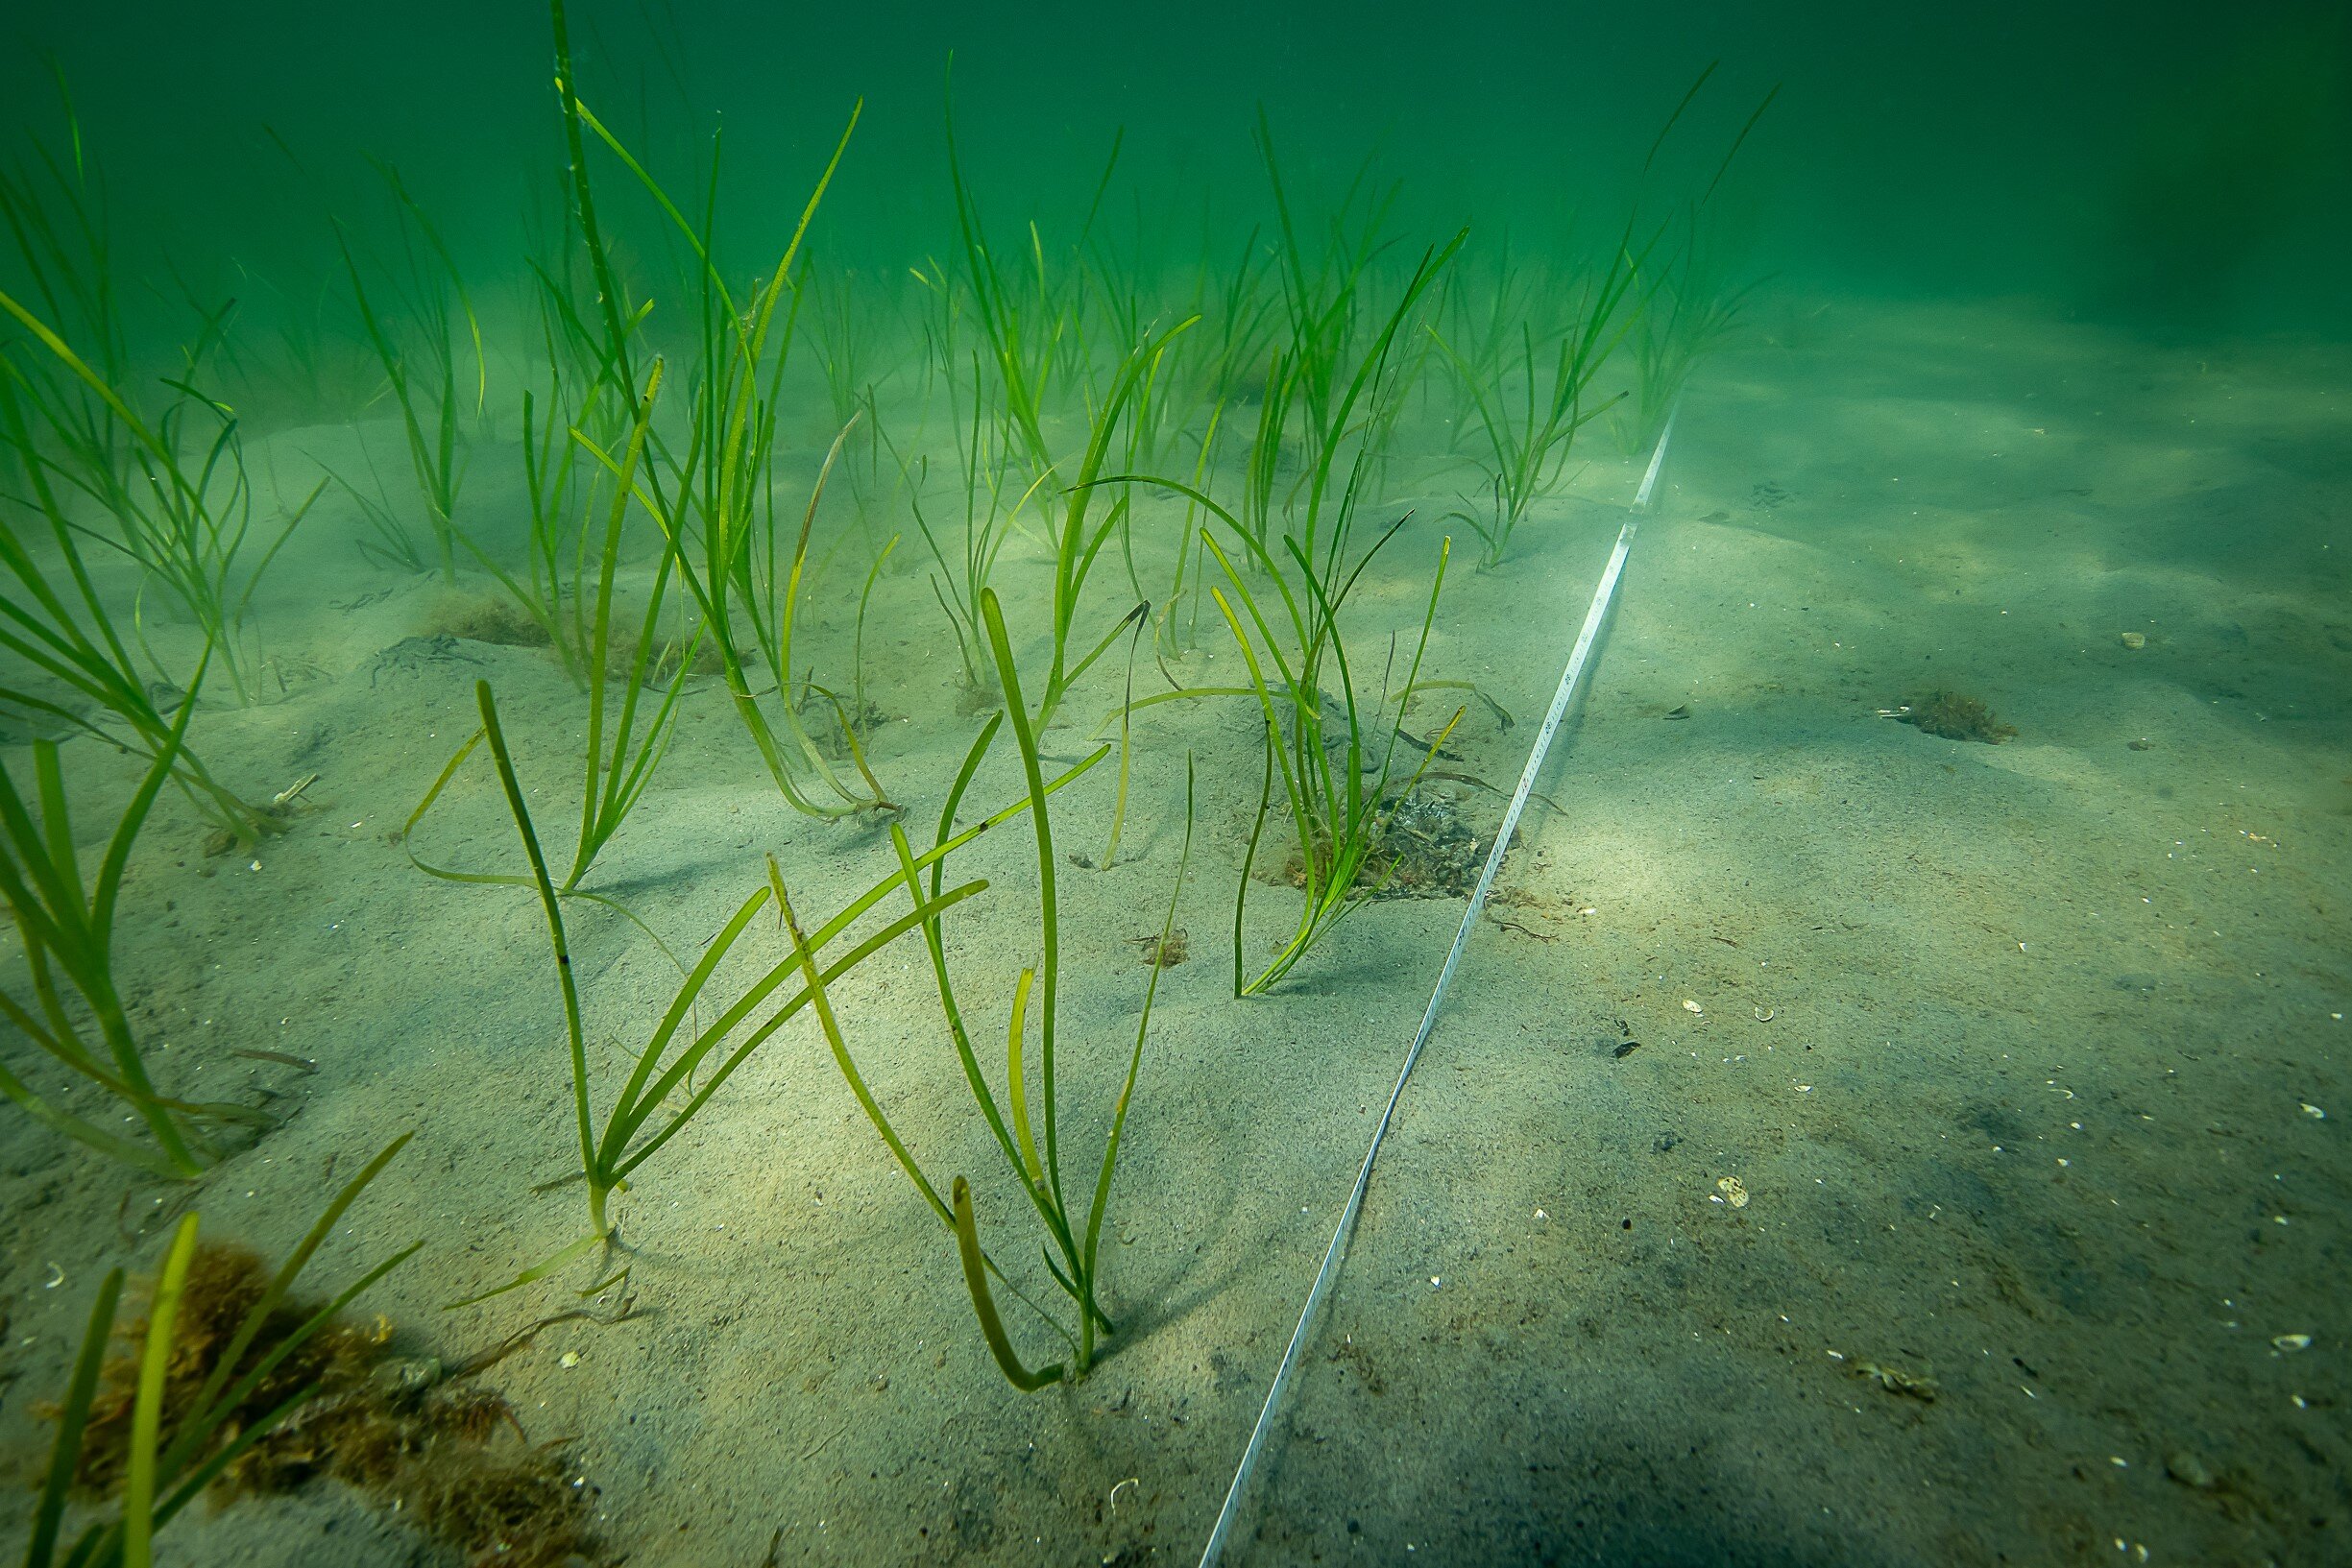 Fauna return rapidly in planted seagrass meadows, study shows